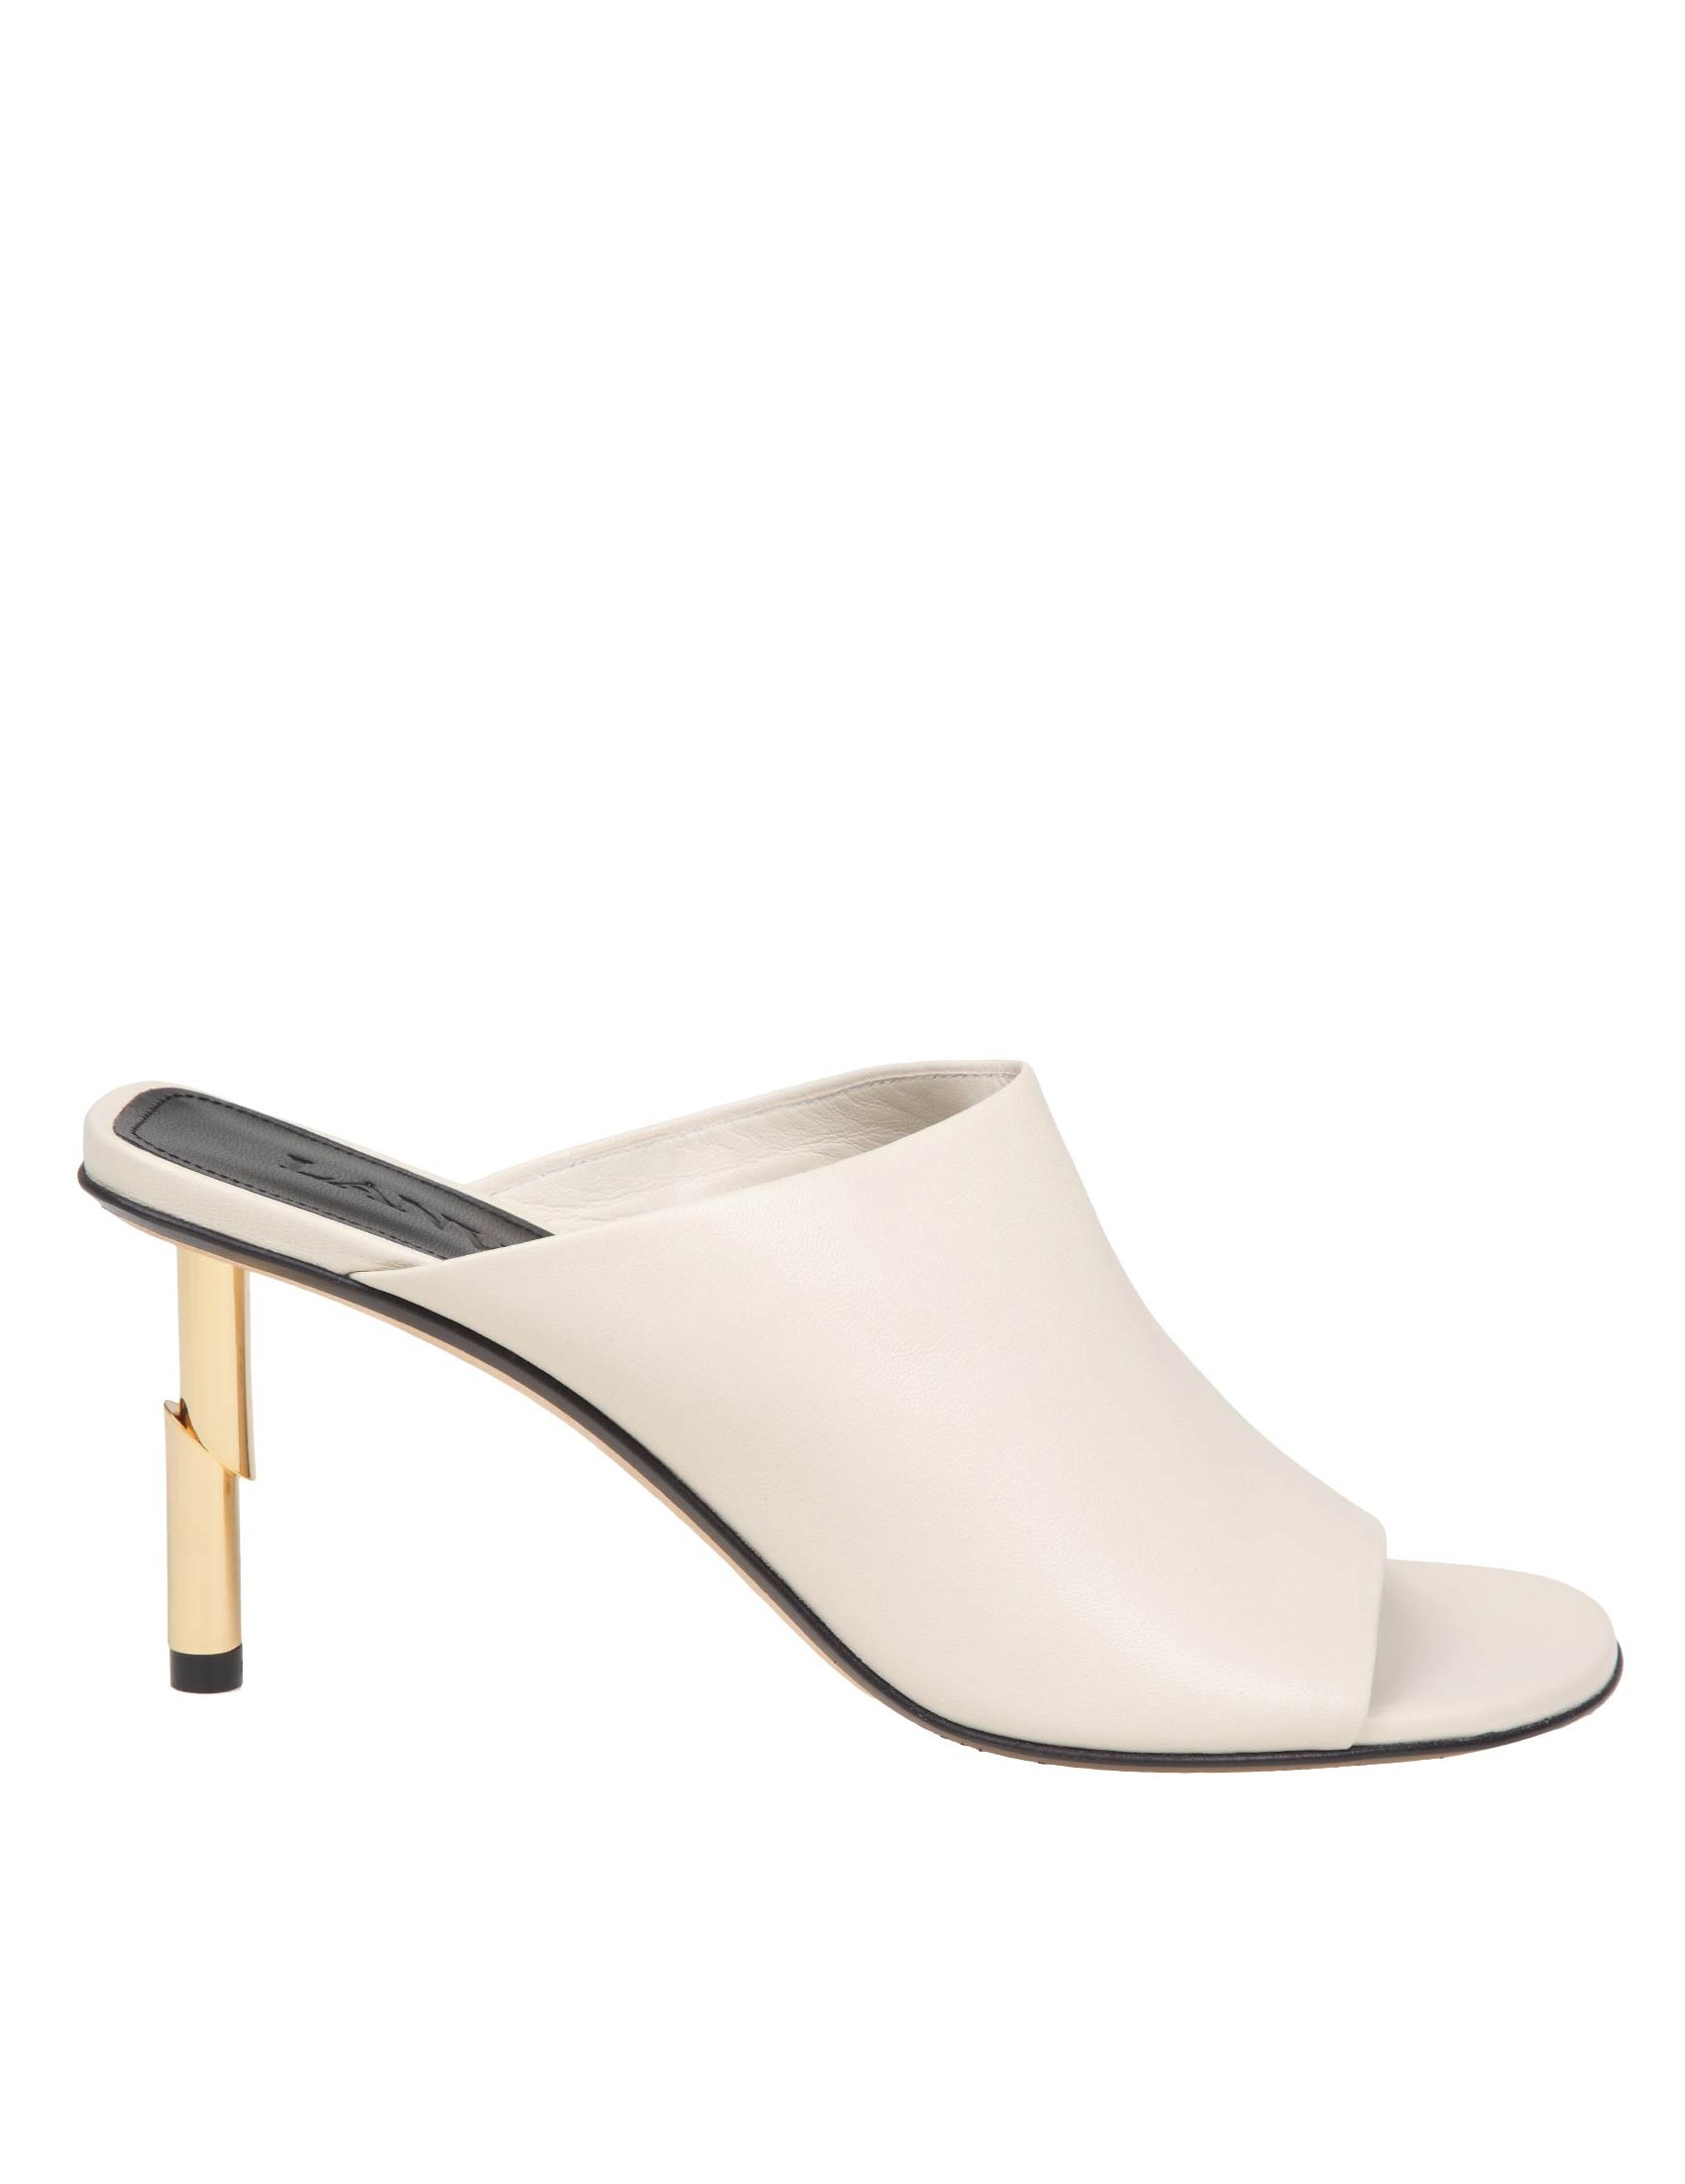 LANVIN MULES IN MILK COLOR LEATHER WITH GOLD HEEL